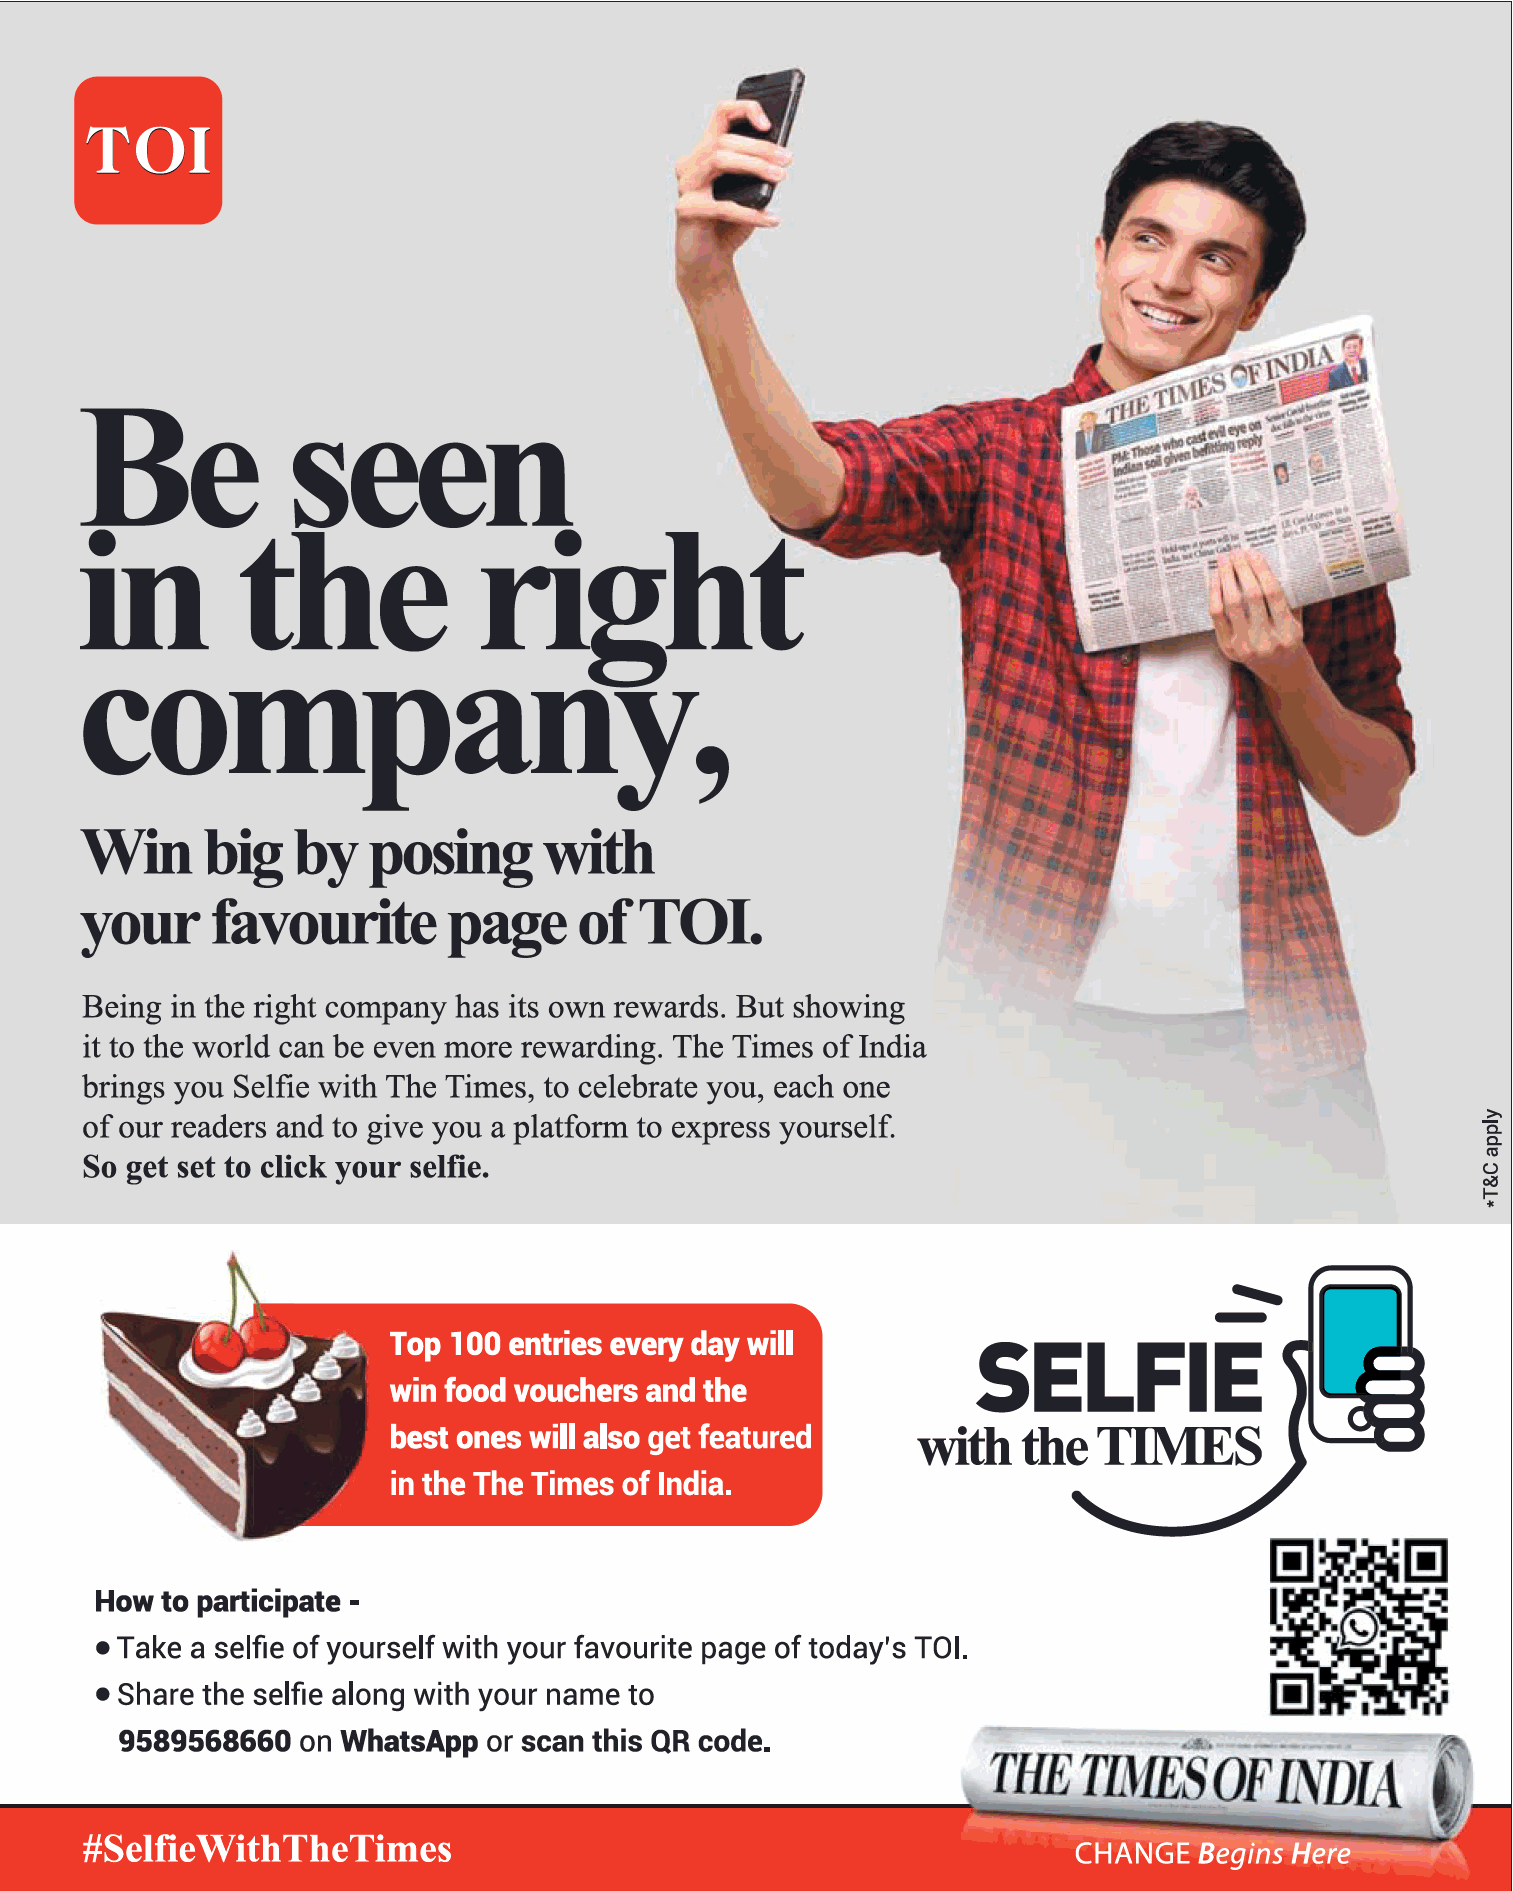 selfie-with-the-times-win-big-by-posing-with-your-favourite-page-of-toi-ad-toi-pune-9-10-2020